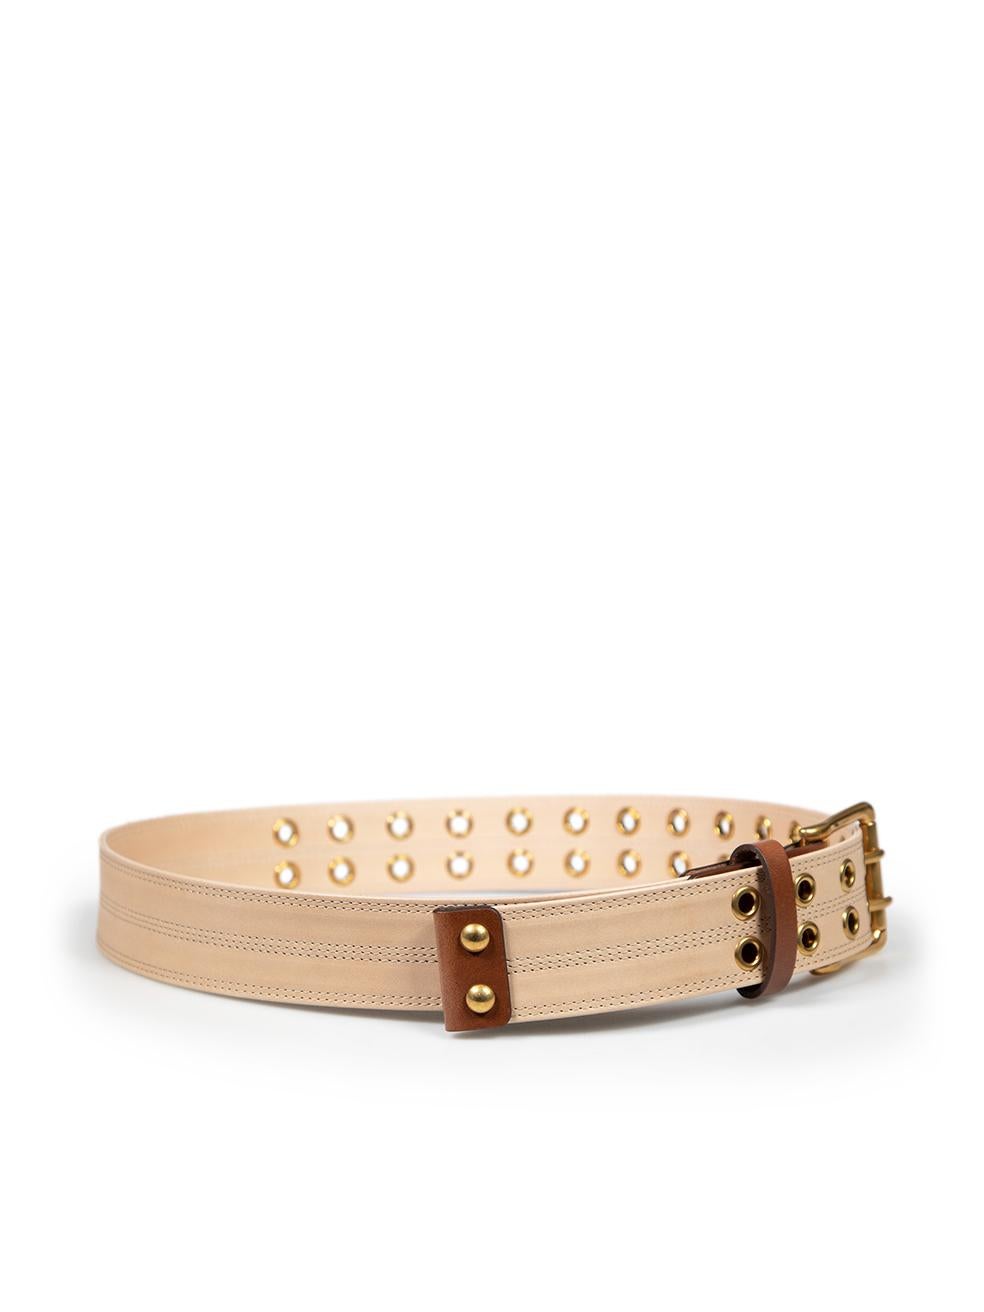 CONDITION is Very good. Hardly any visible wear to the belt is evident on this used Chloé designer resale item. This item comes with an original dust bag and box.
 
 
 
 Details
 
 
 Beige
 
 Leather
 
 Belt
 
 Gold tone hardware
 
 Eyelets detail
